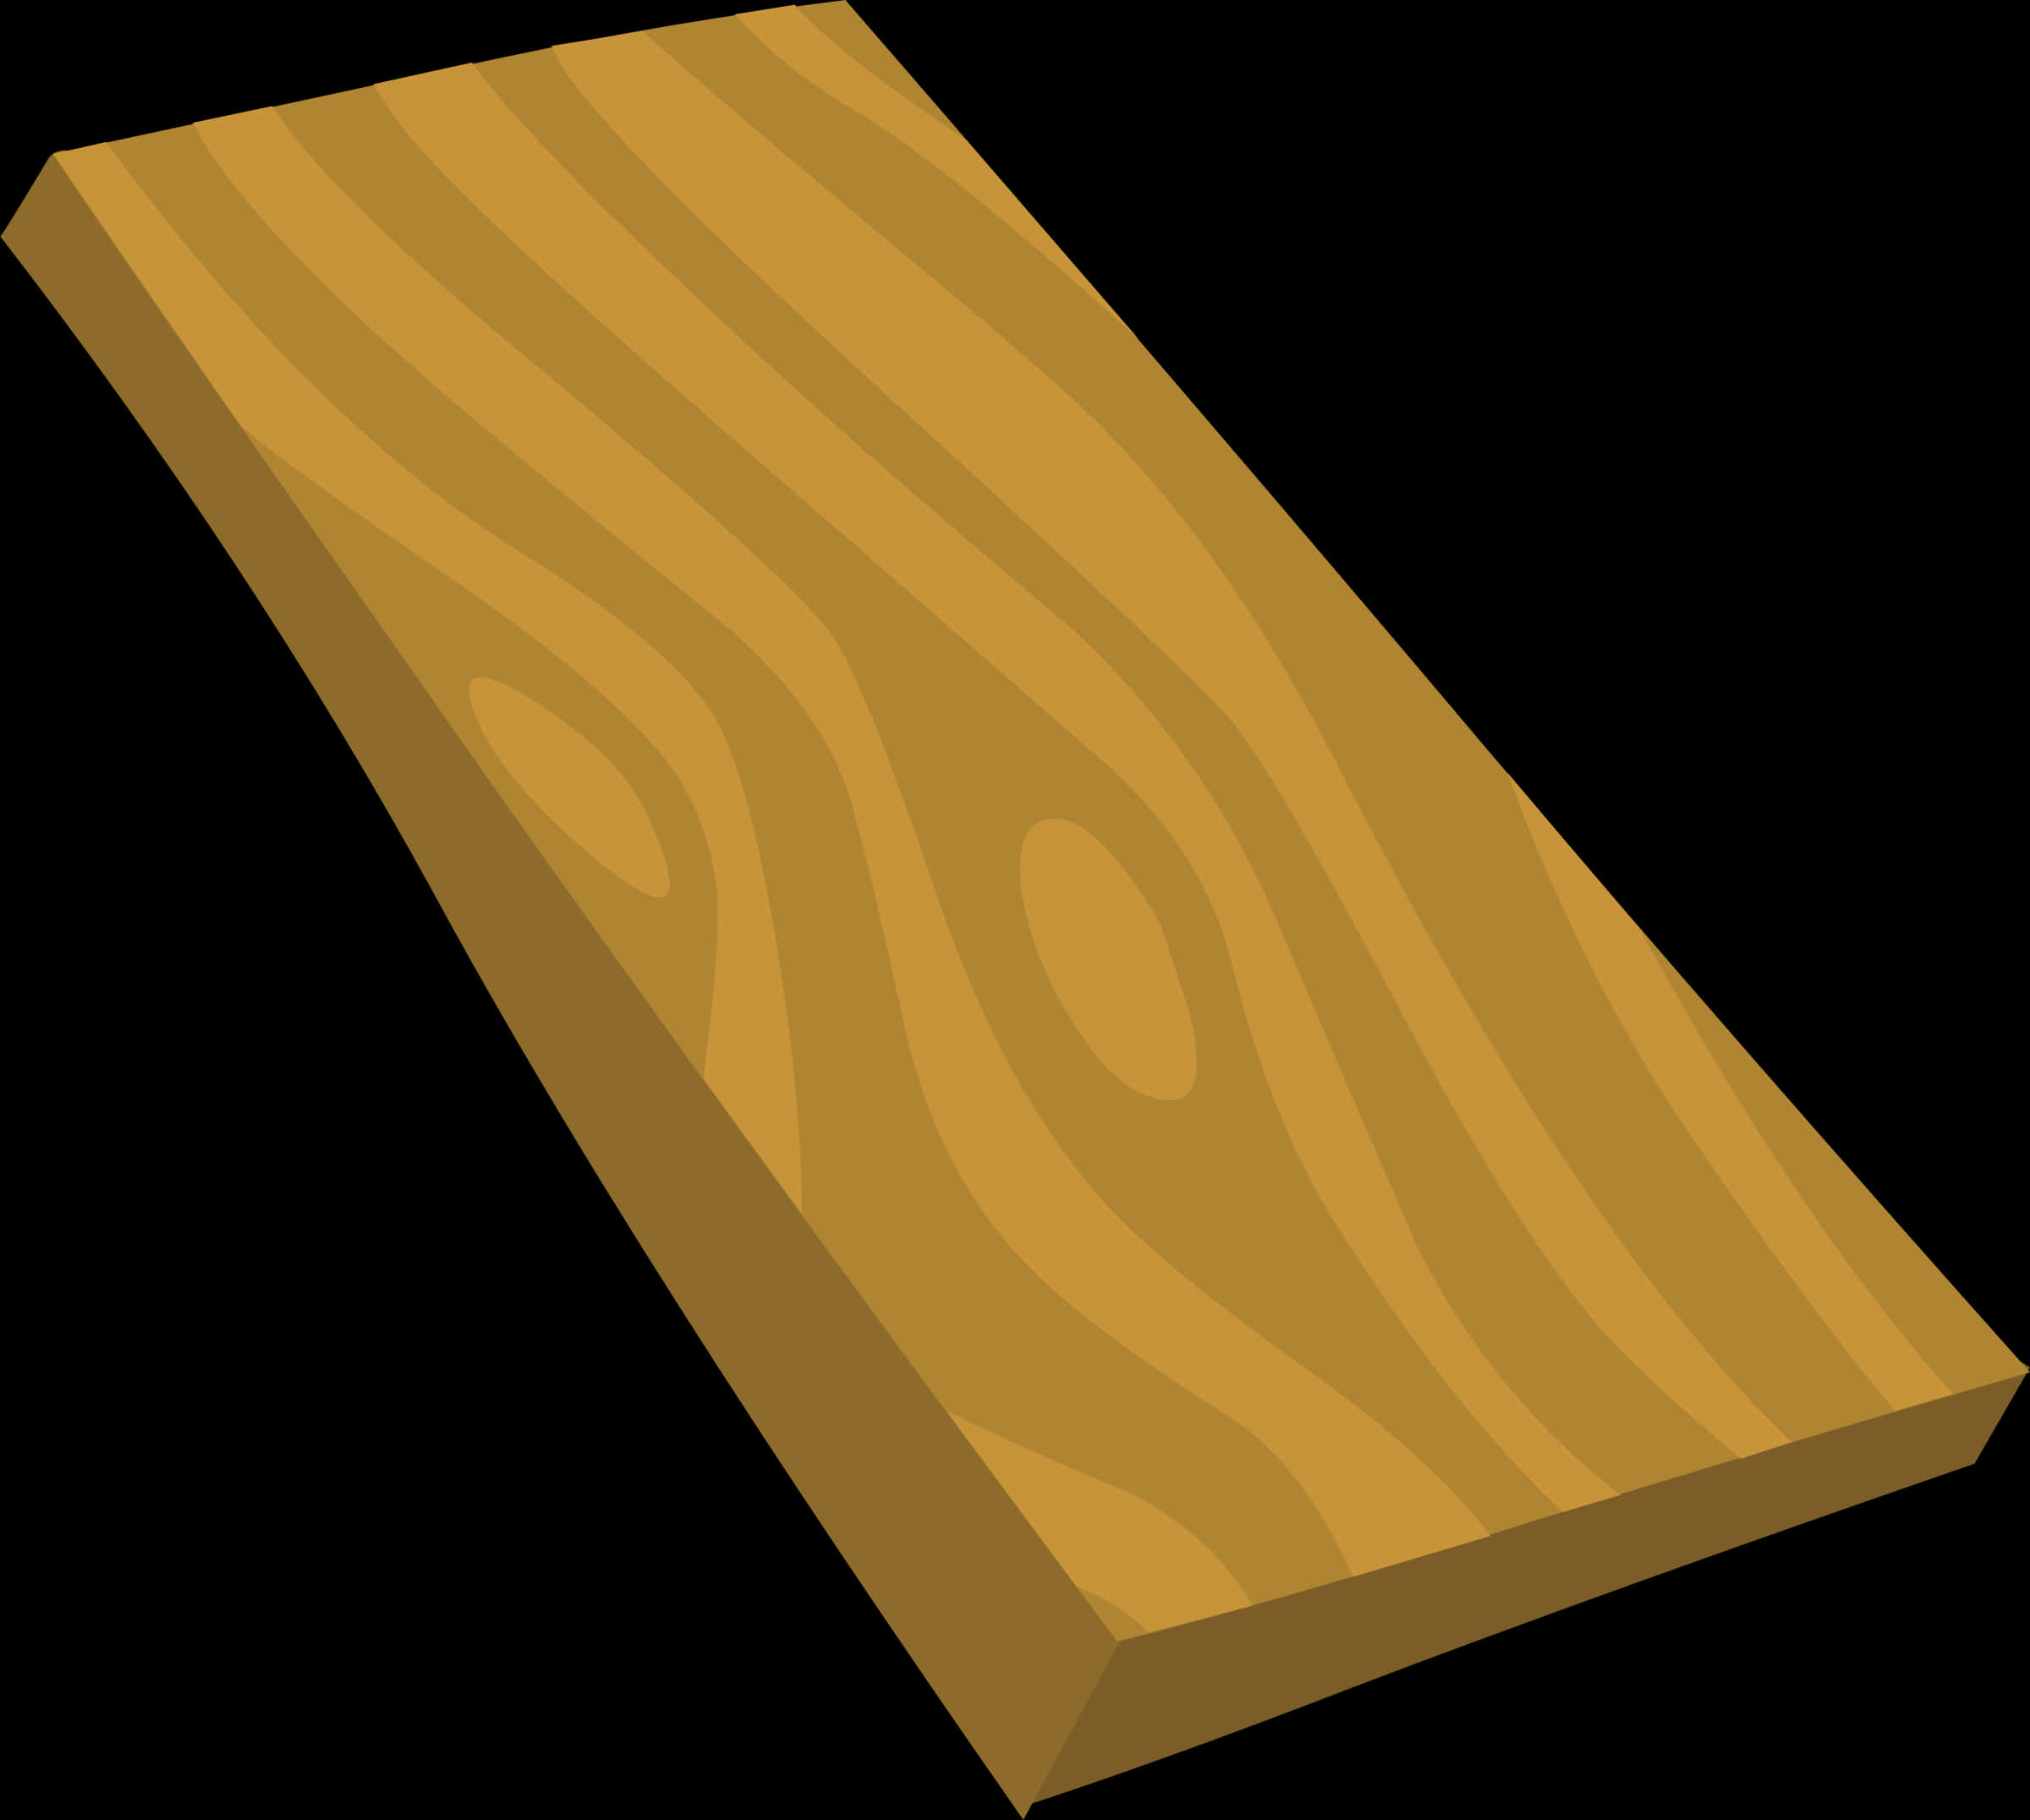 A Piece Of Wood With A Black Background